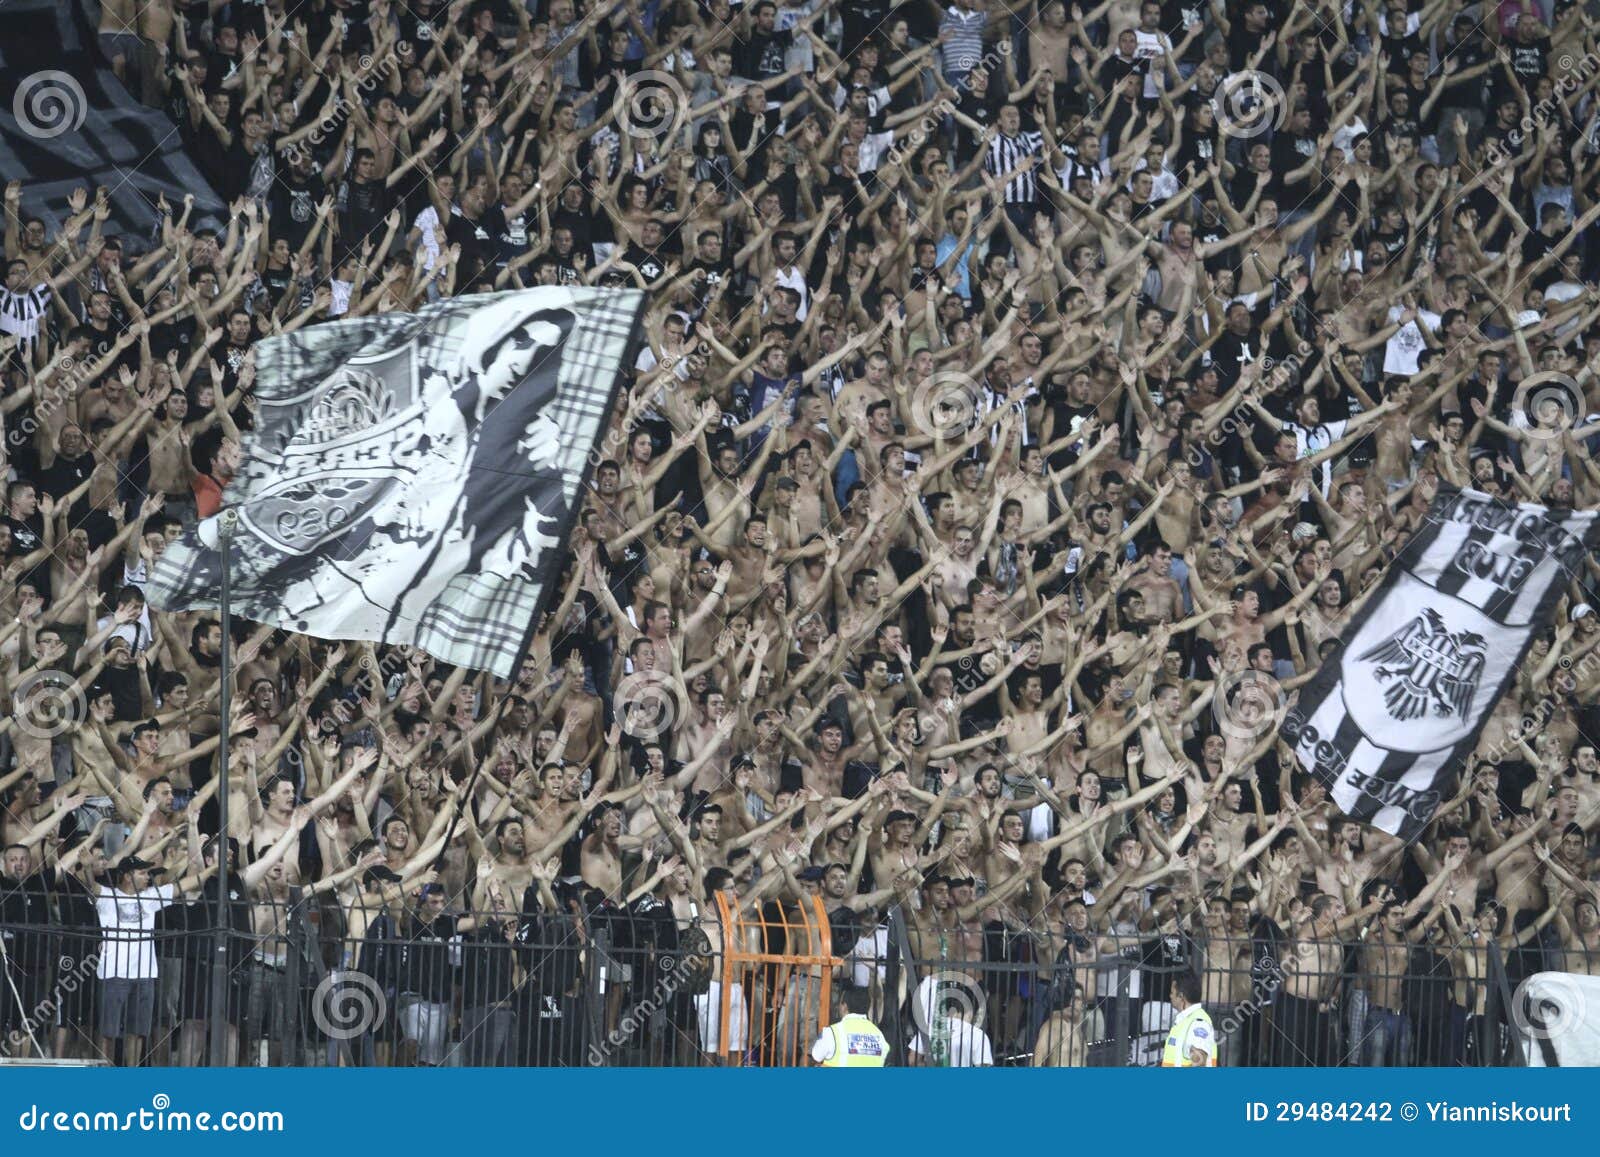 Paok Fans